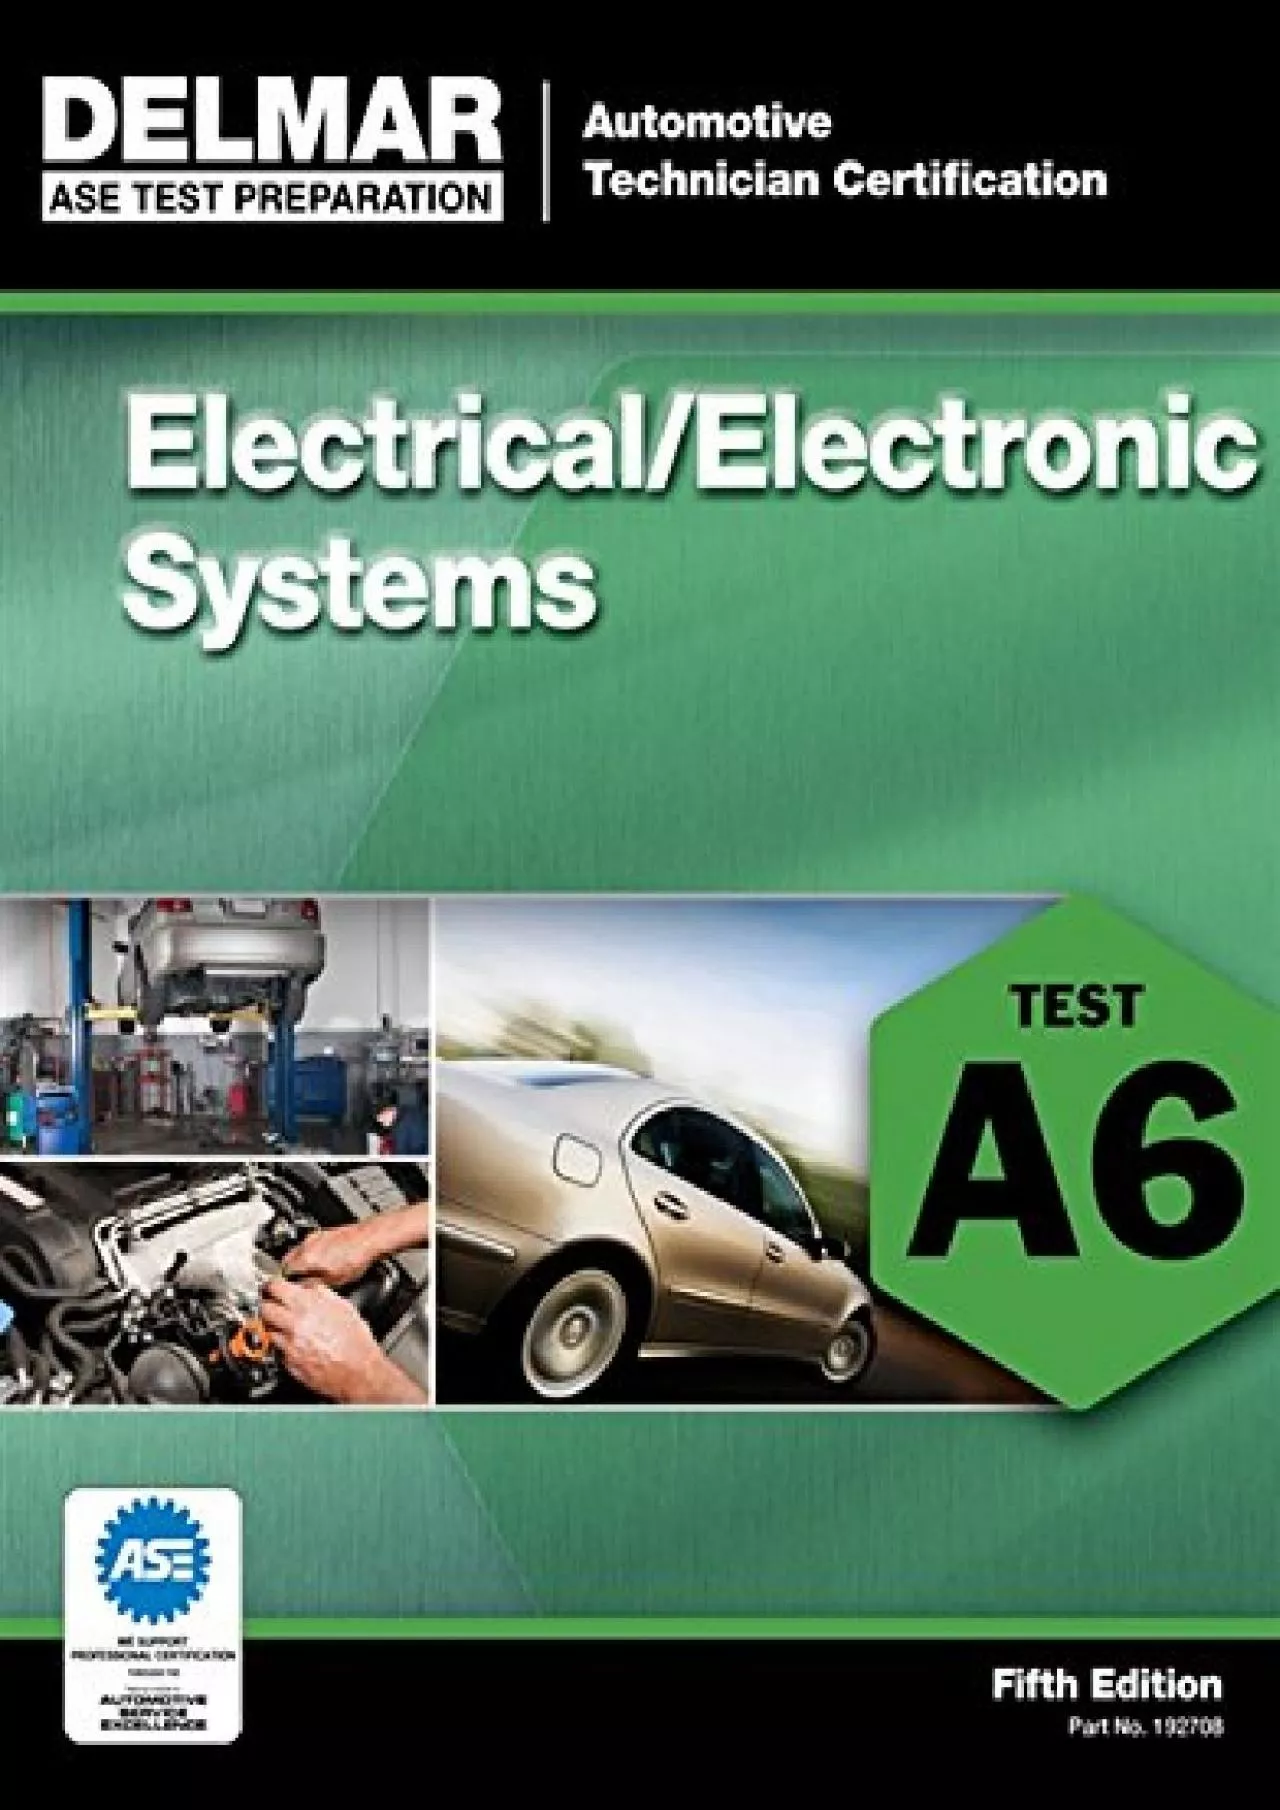 [DOWNLOAD] ASE Test Preparation - A6 Electrical/Electronic Systems Ase Test Preparation